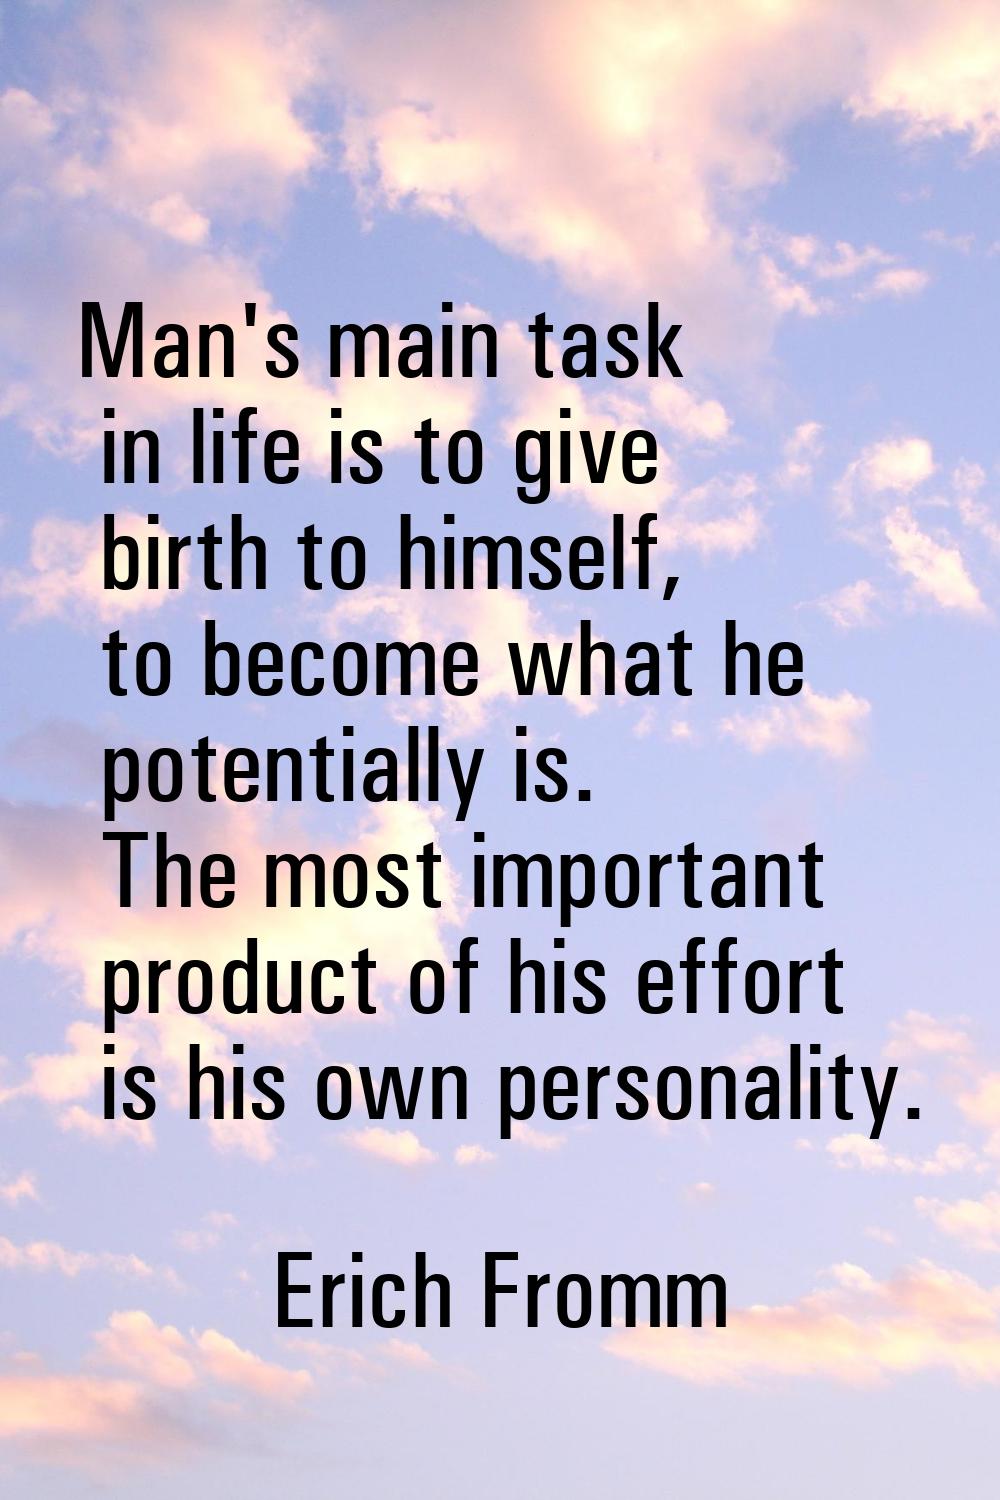 Man's main task in life is to give birth to himself, to become what he potentially is. The most imp